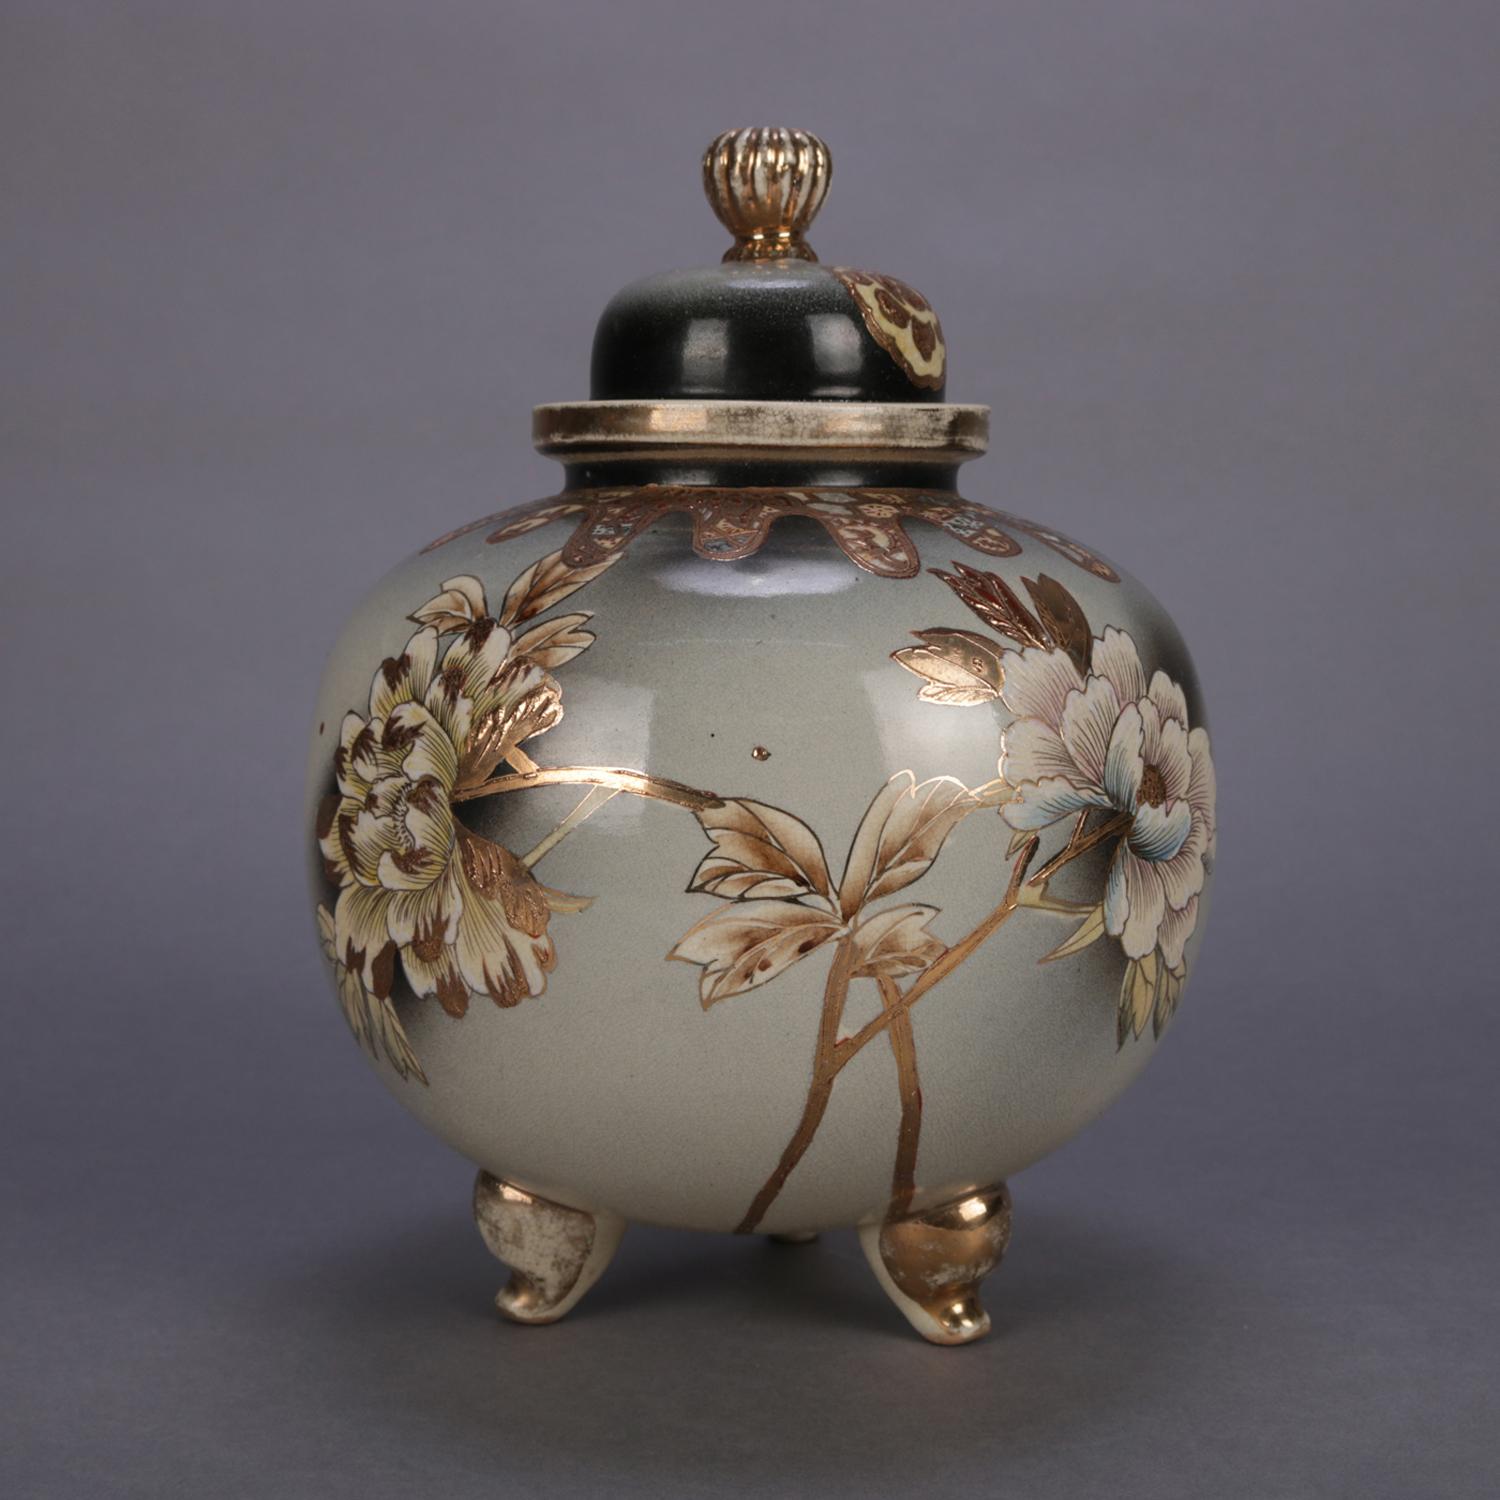 An antique Japanese Satsuma porcelain jar features ball form and hand painted and gilt floral decoration, lid with reeded finial and seated on gilt scroll form feet, chop mark signed on base, 20th century

Measures: 12